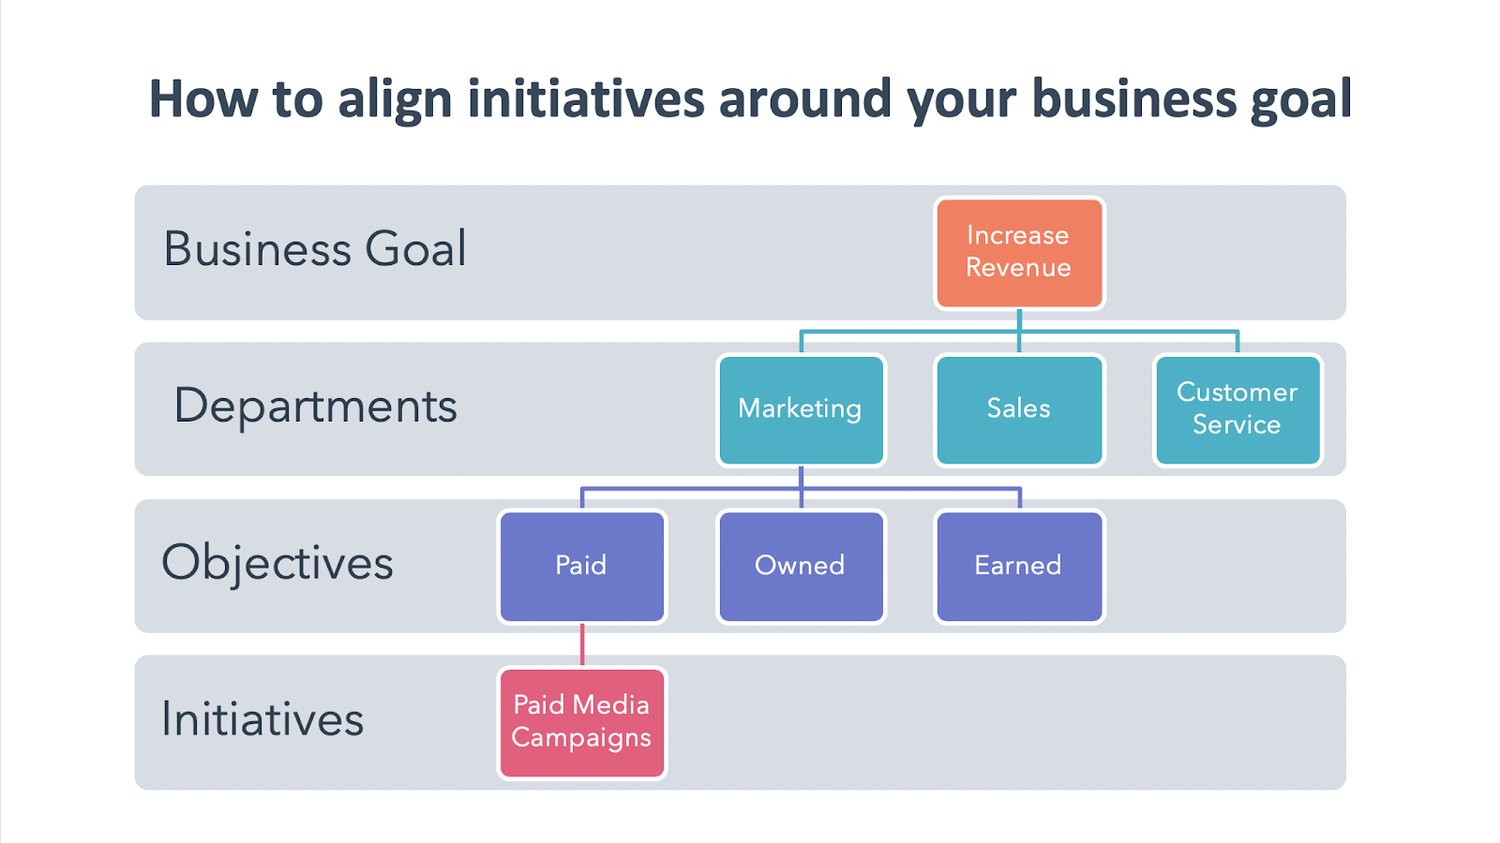 how to align initiatives around your business goals  How Much You Should Actually Spend on Digital Advertising in 2020 How 20Much 20You 20Should 20Actually 20Spend 20on 20Digital 20Advertising 20in 202020